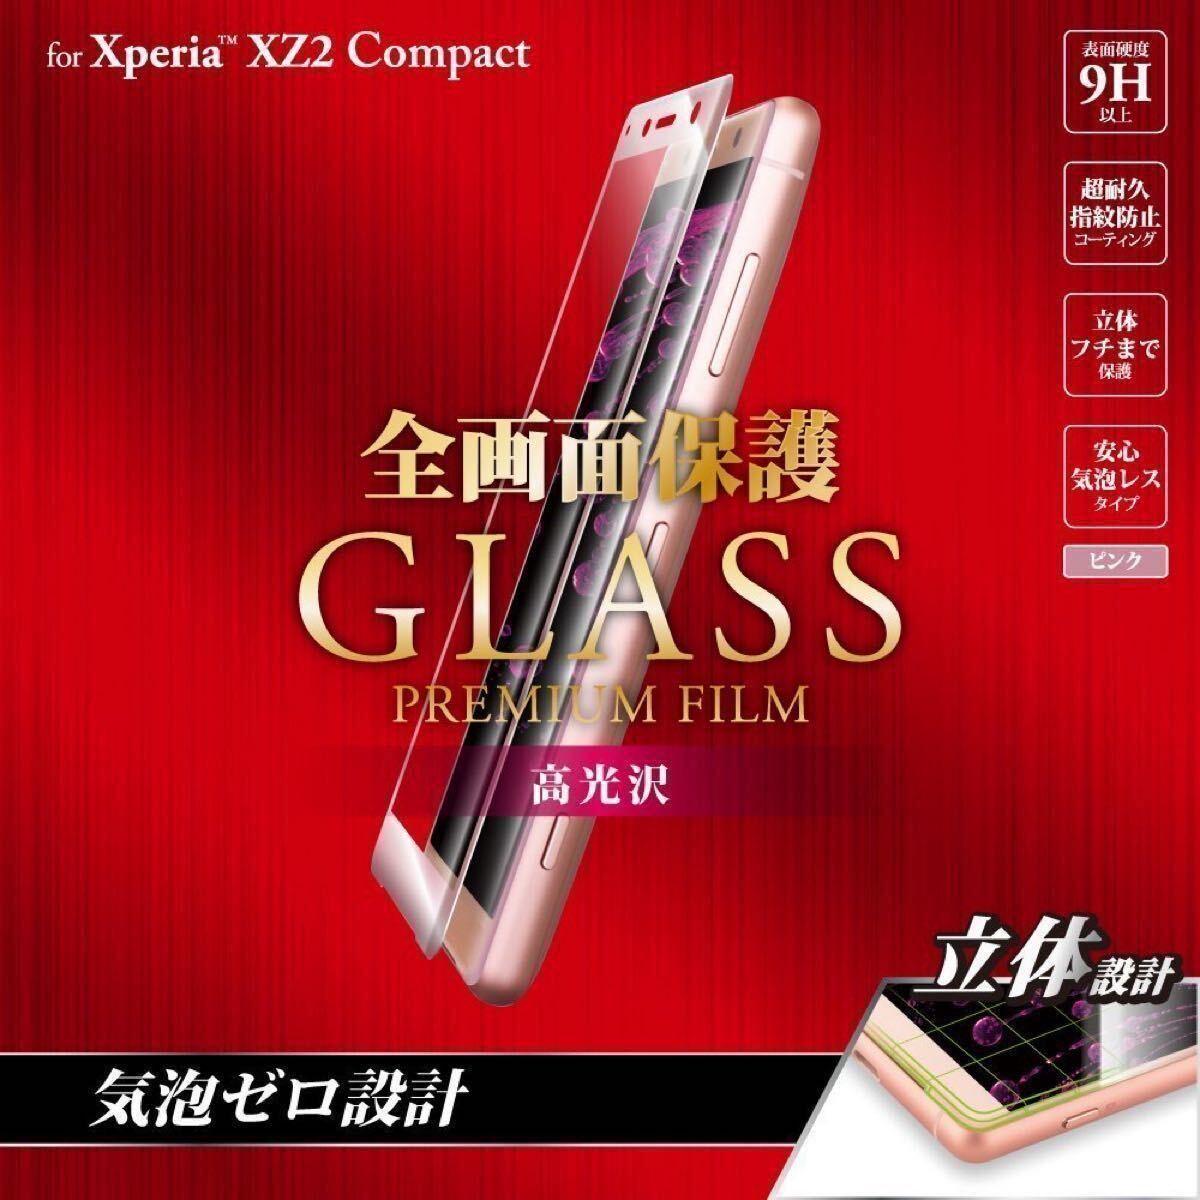 f XperiaXZ2 Compact ガラスフィルム ピンクフレーム 全画面保護/高光沢/0.20mm LP-XPXC2FGFPK SO-05K_画像2